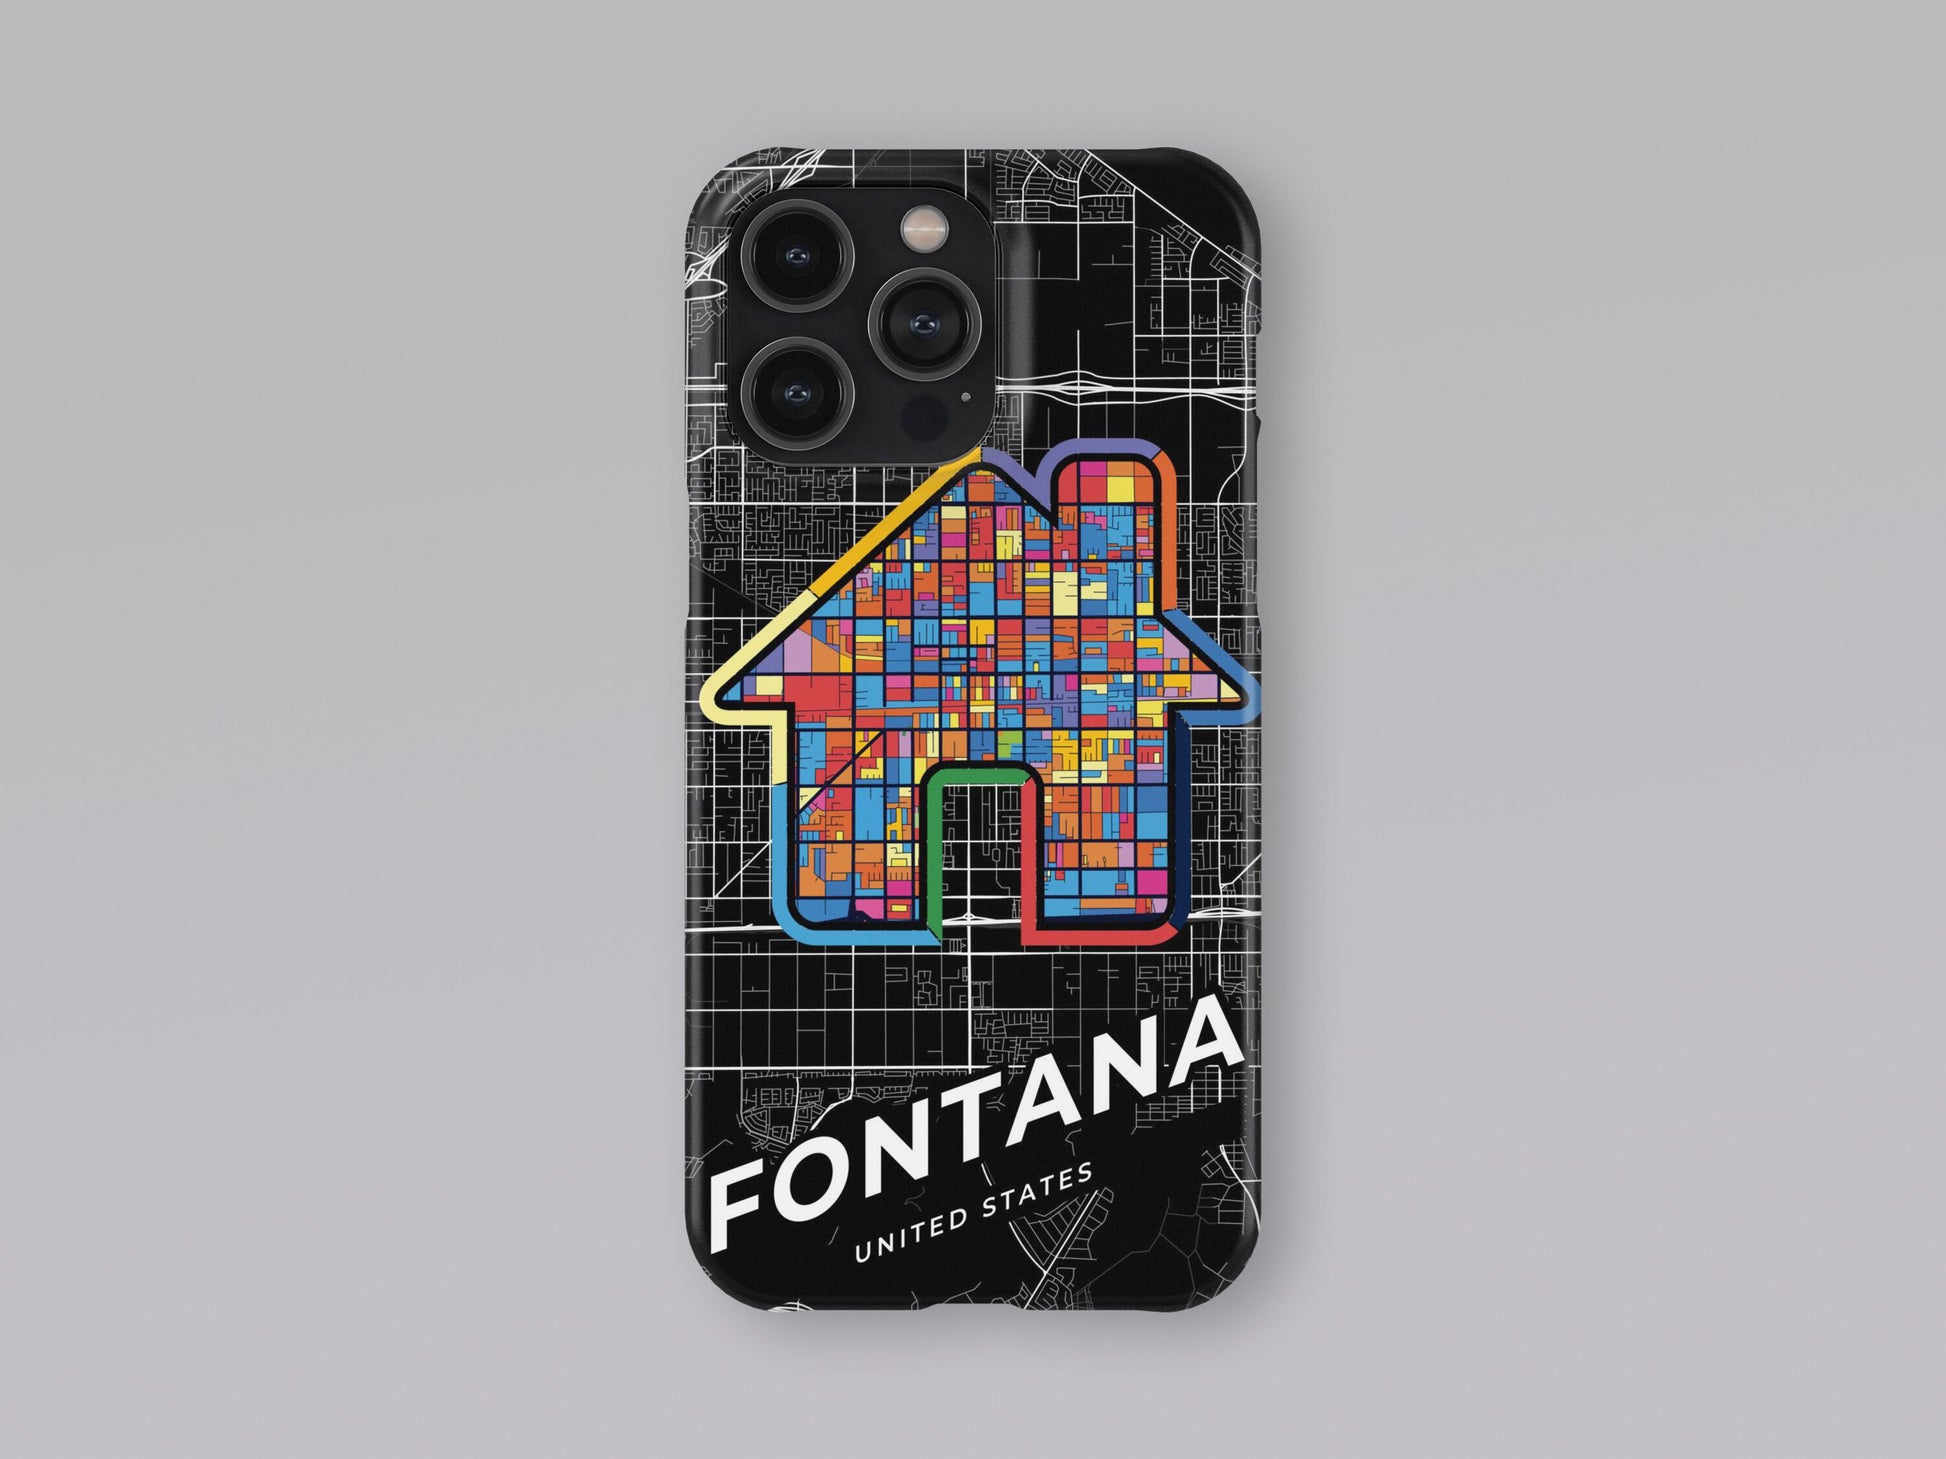 Fontana California slim phone case with colorful icon. Birthday, wedding or housewarming gift. Couple match cases. 3